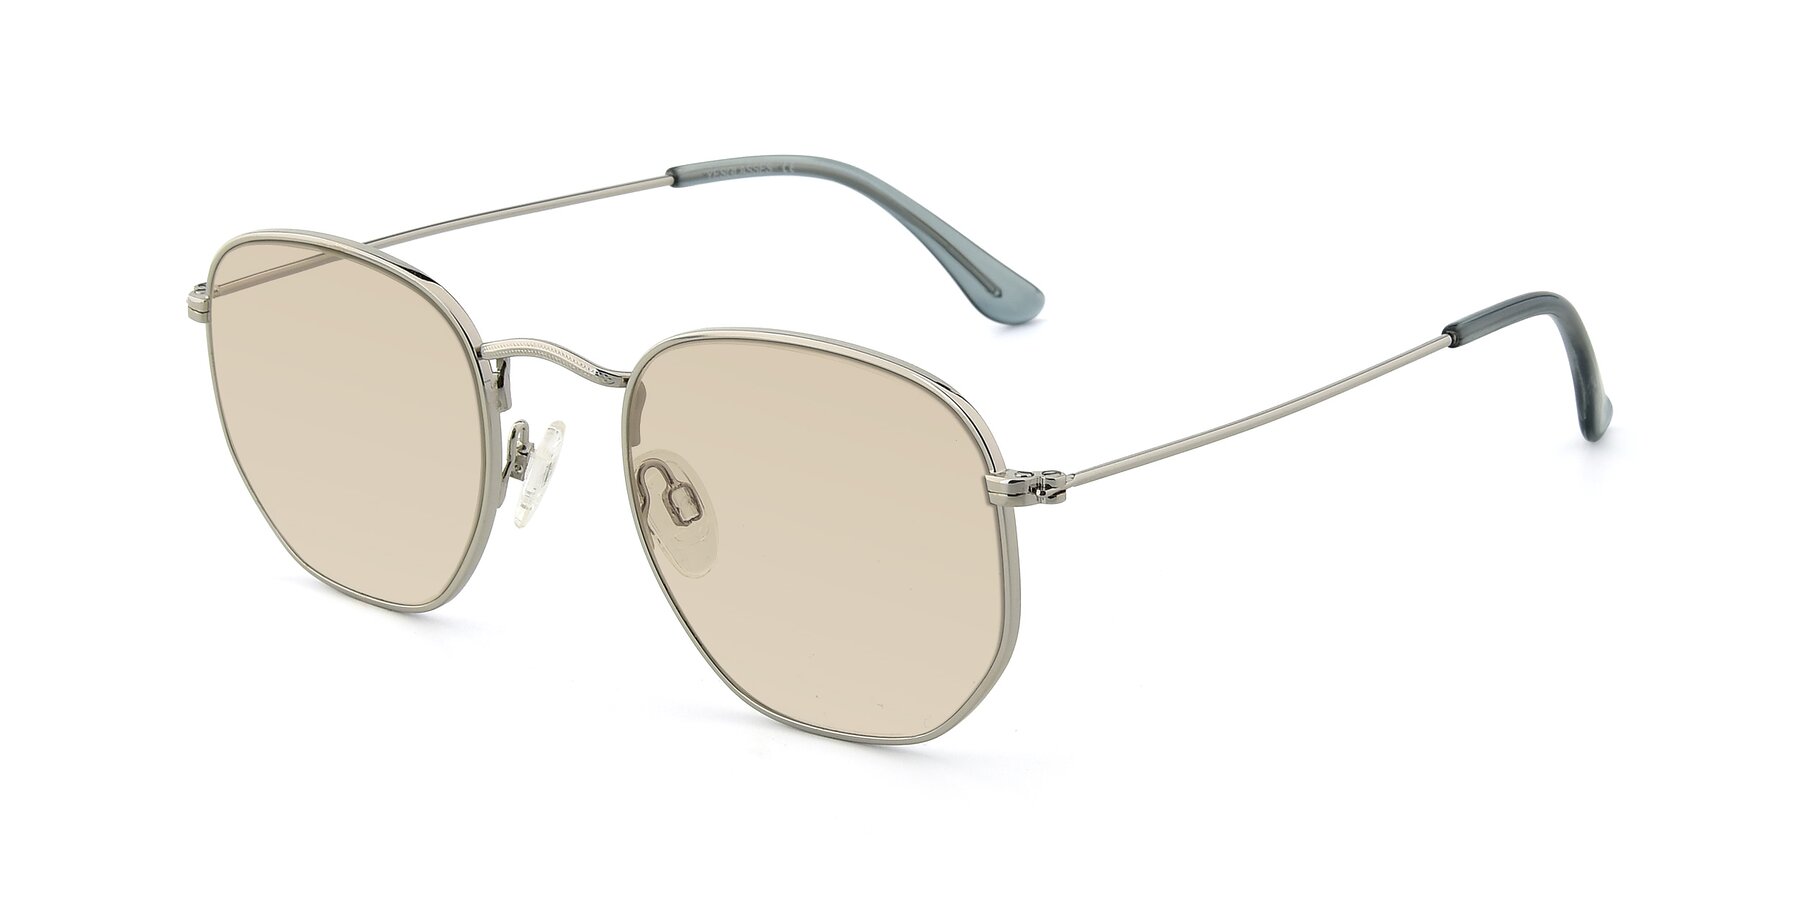 Angle of SSR1943 in Silver with Light Brown Tinted Lenses